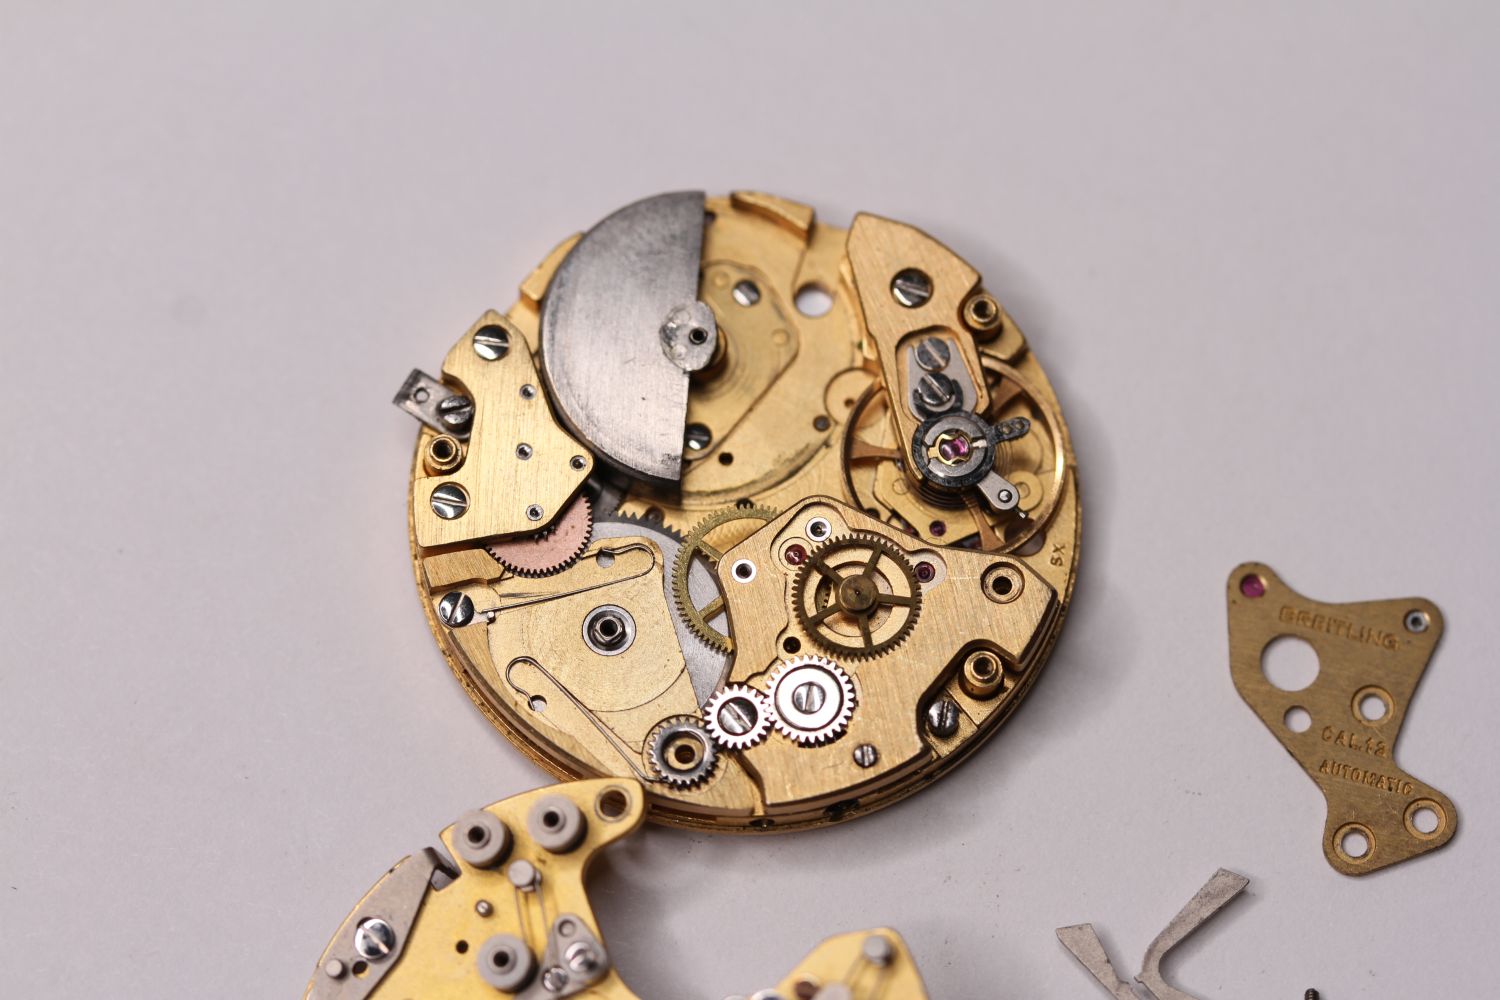 BREITLING CALIBRE 12 MOVEMENT INCLUDING CROWN, STEM, DATE WHEEL, 17 JEWEL - Image 3 of 5